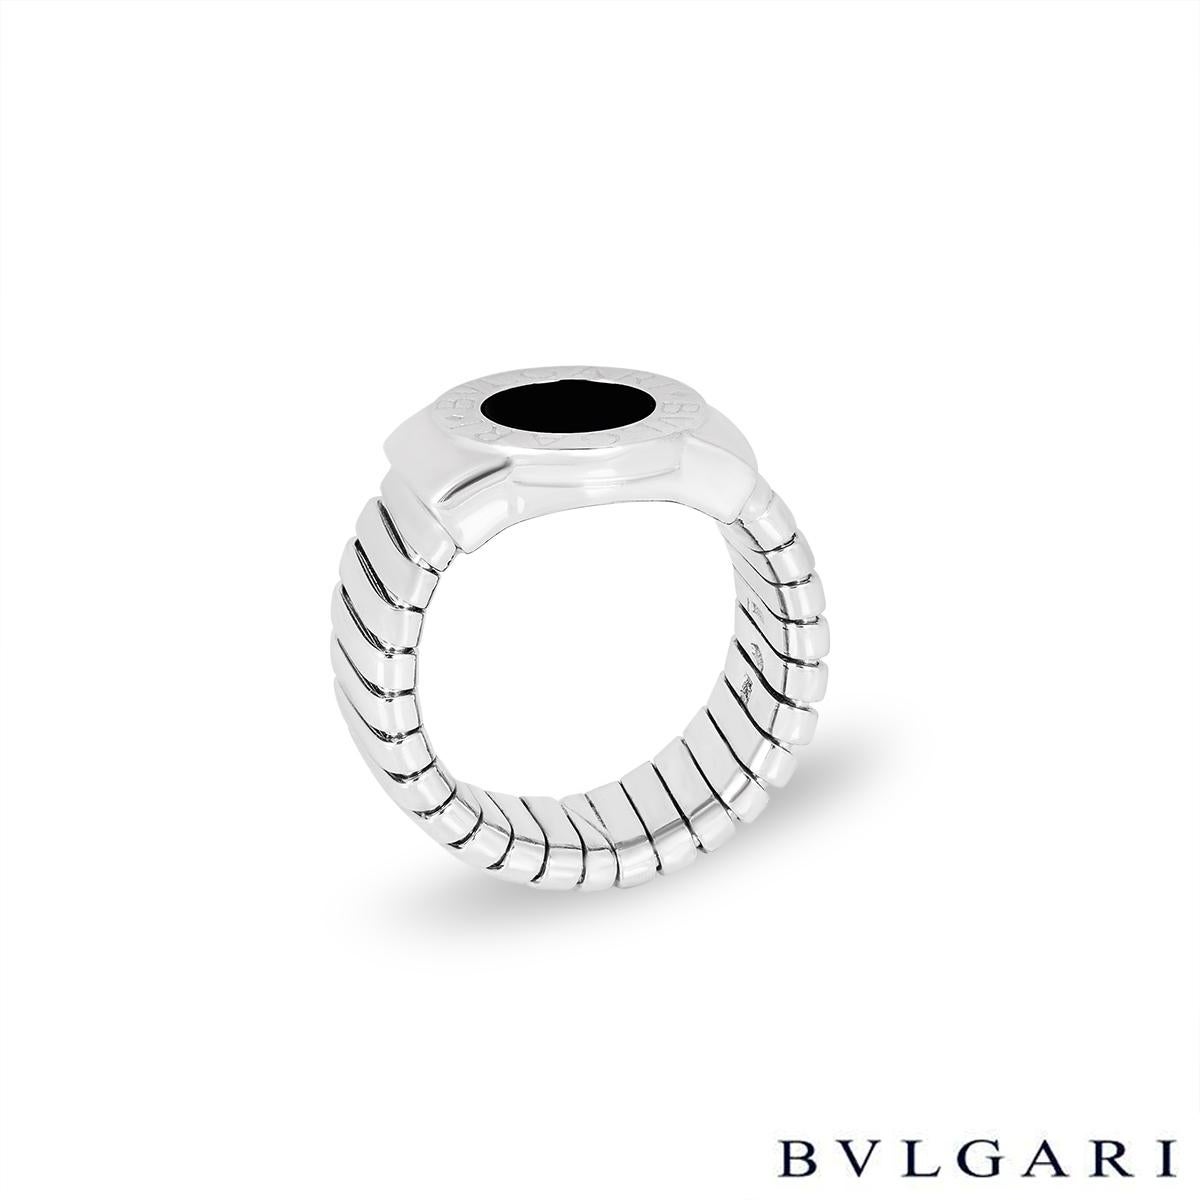 A chic 18k white gold onyx ring by Bvlgari from the Bvlgari Bvlgari collection. The ring is set to the centre with a round onyx inlay in a high polish surround engraved 'Bvlgari Bvlgari'. The Tubogas ring tapers down from 12.8mm to 8.6mm, is a size